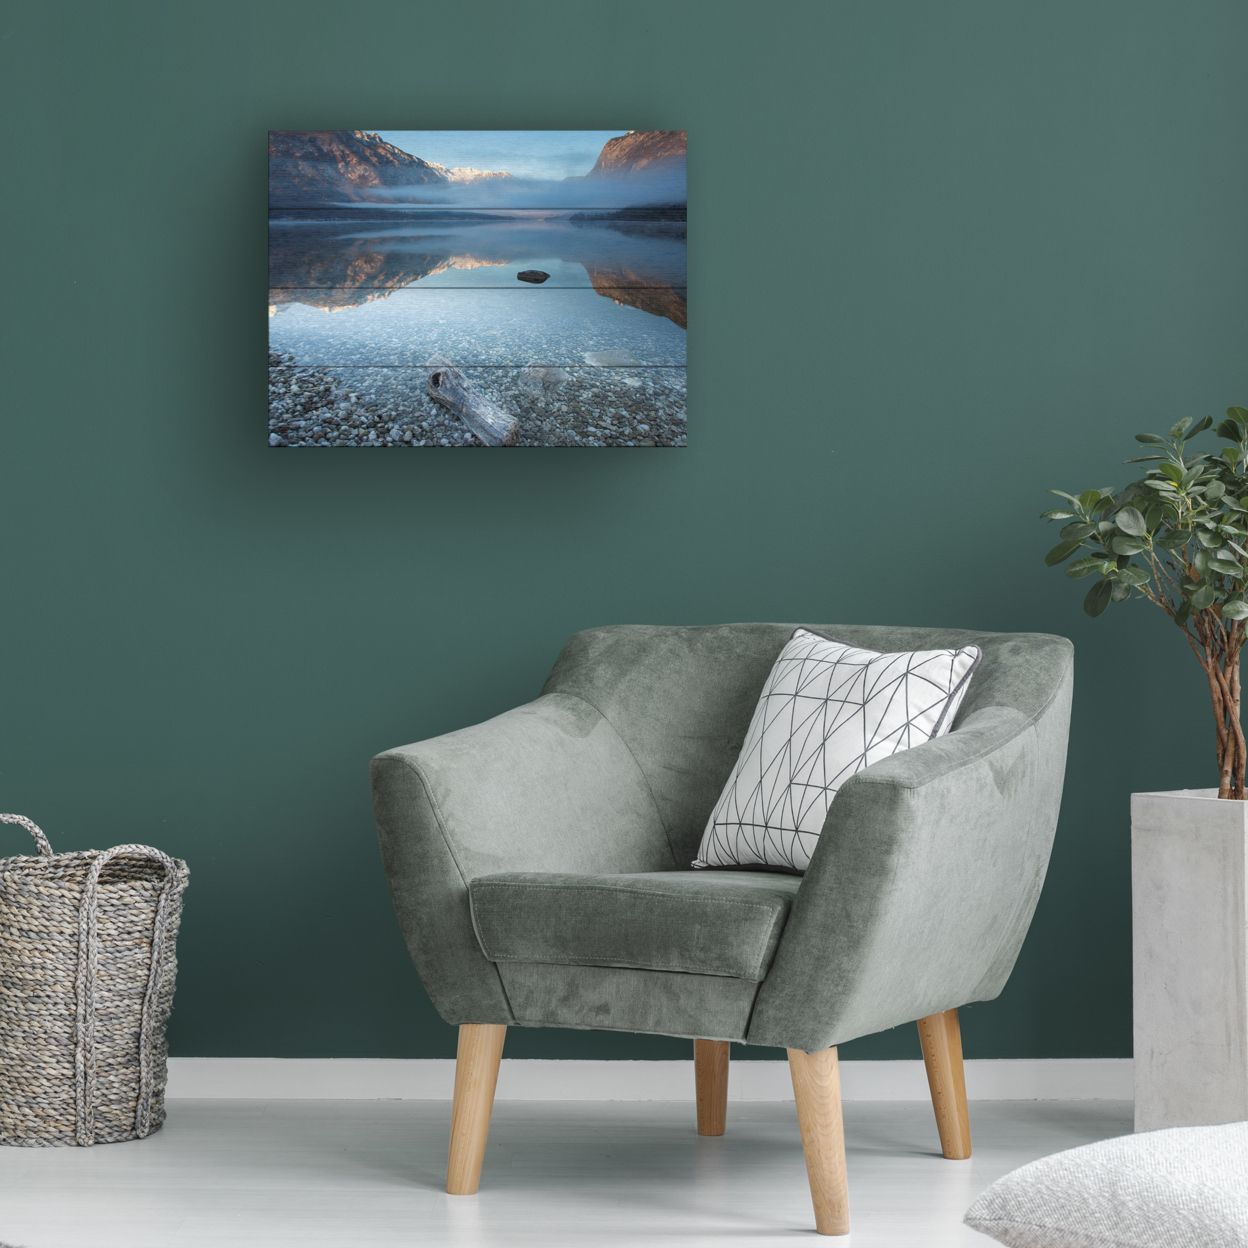 Wall Art 12 X 16 Inches Titled Bohinjs Tranquility Ready To Hang Printed On Wooden Planks